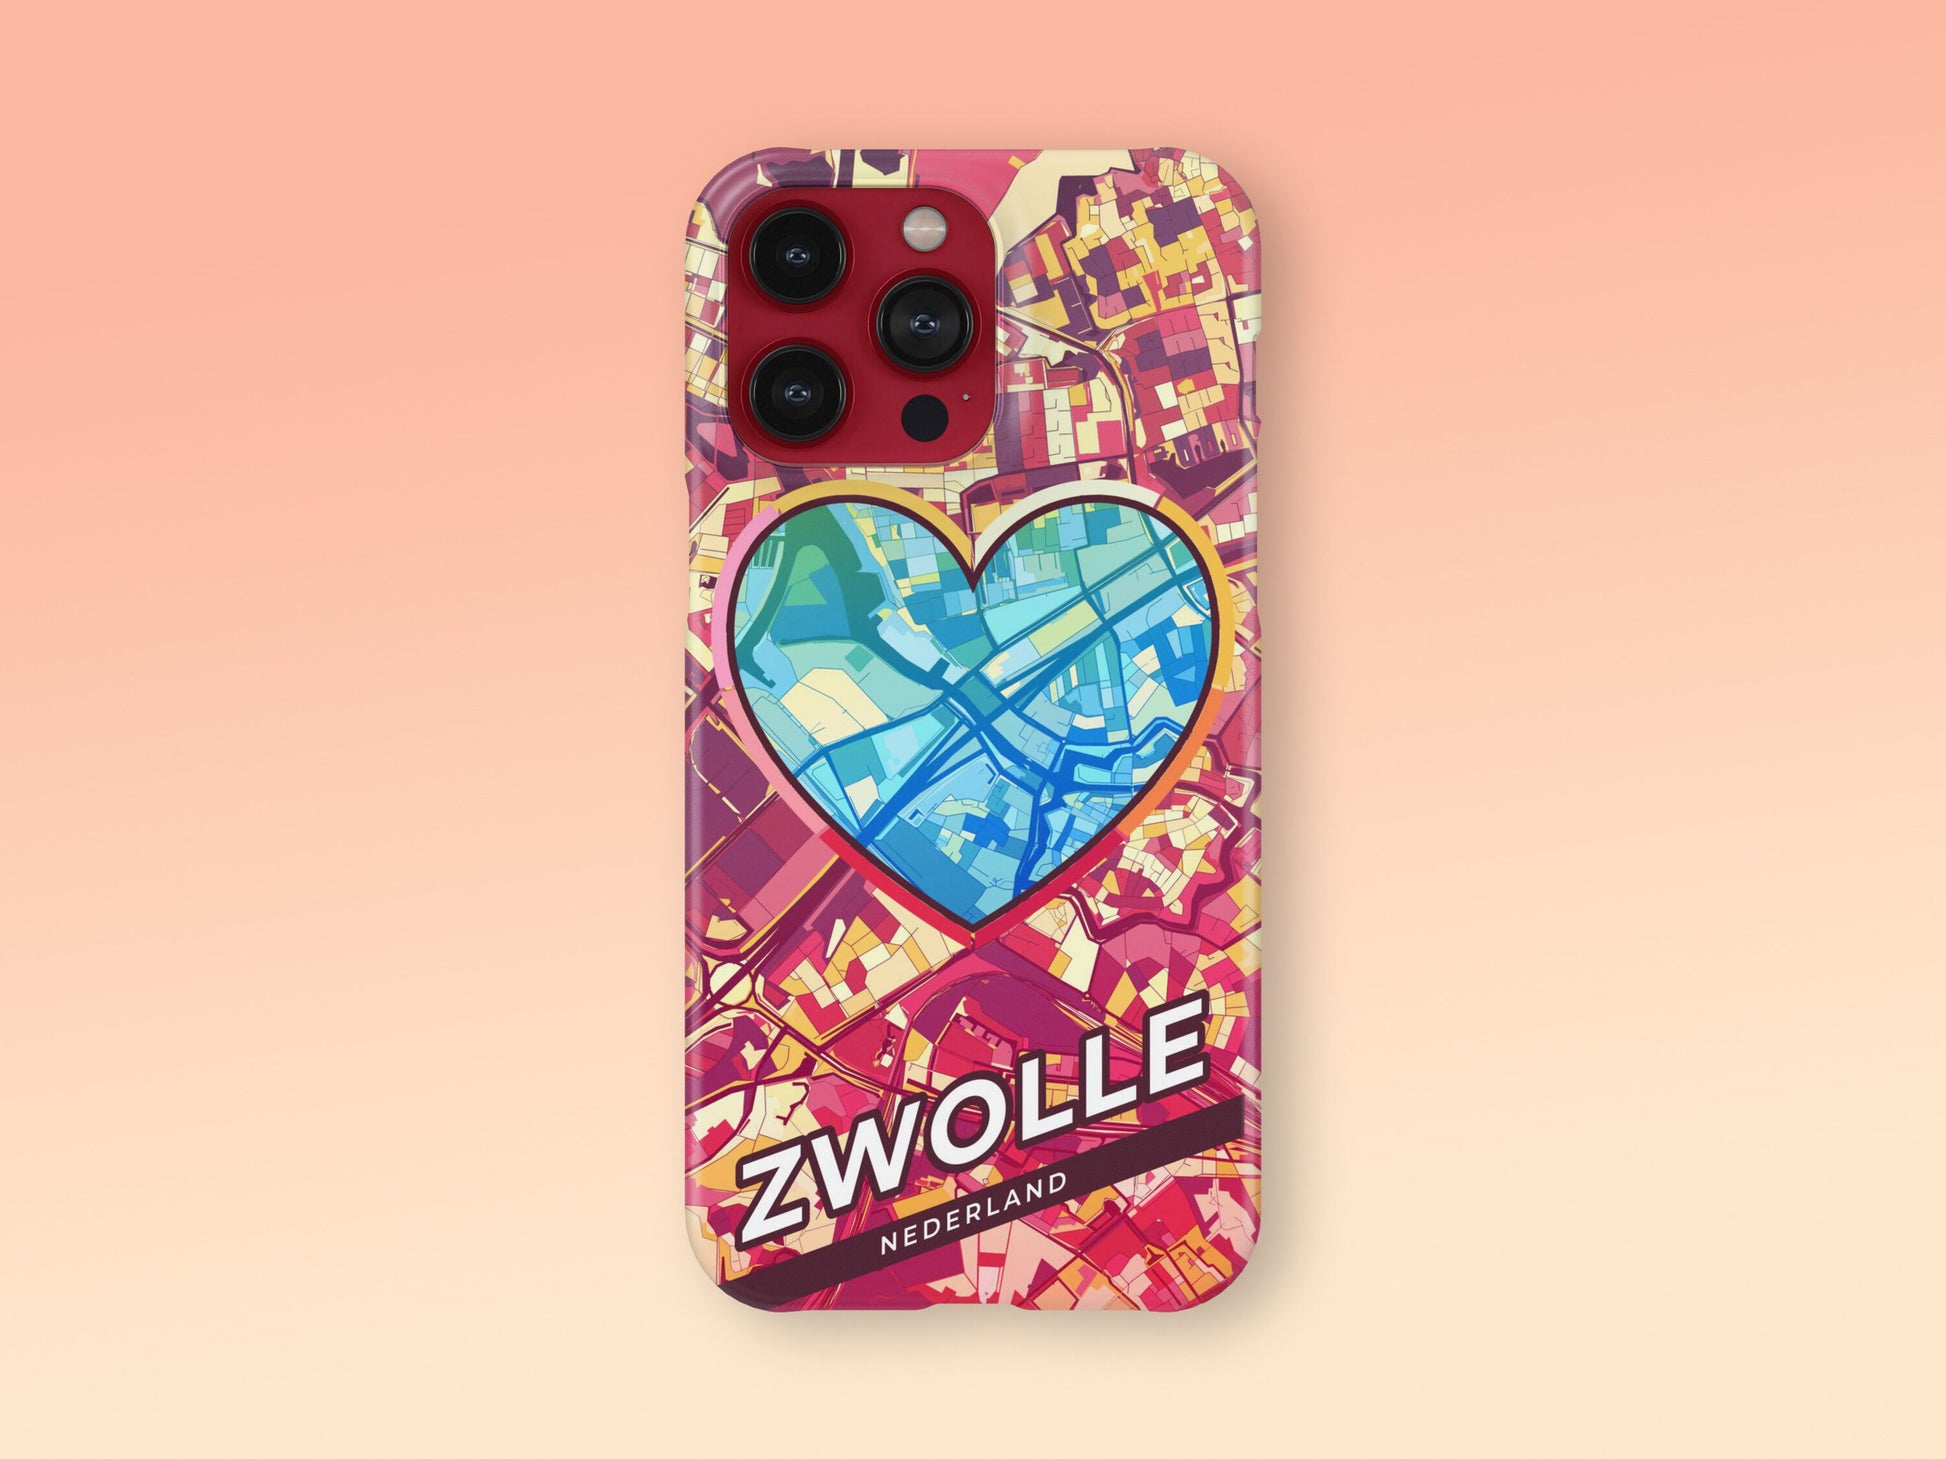 Zwolle Netherlands slim phone case with colorful icon 2